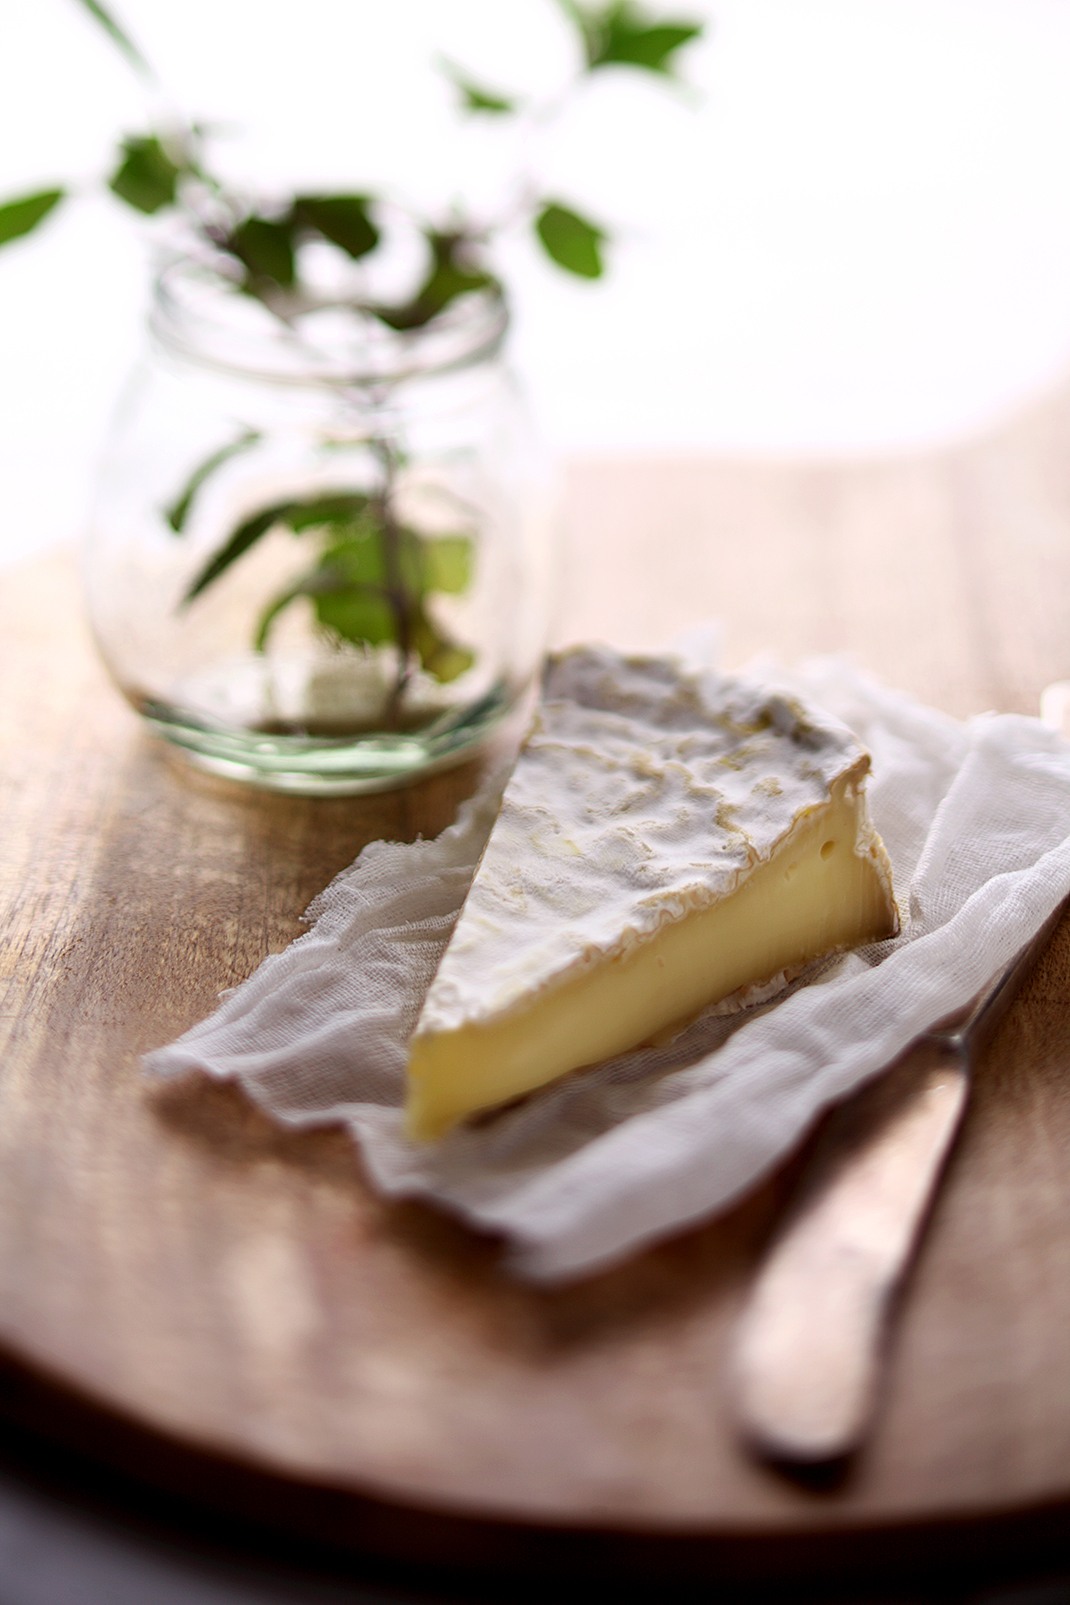 Brie - courtesy The Spotted Cow Fromagerie